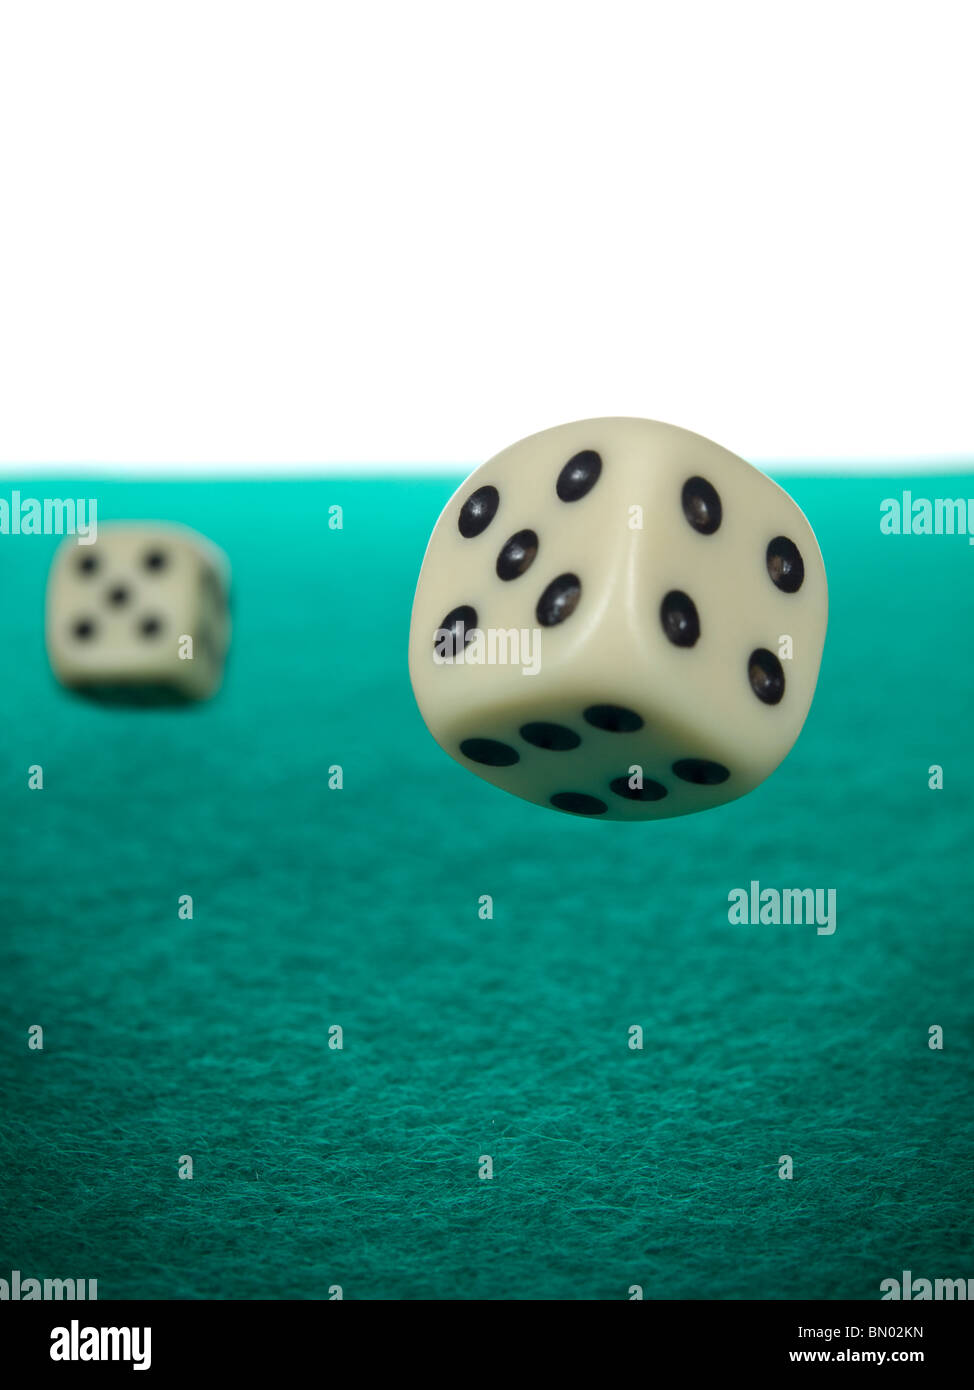 A pair of dices rolling over a green felt. Stock Photo